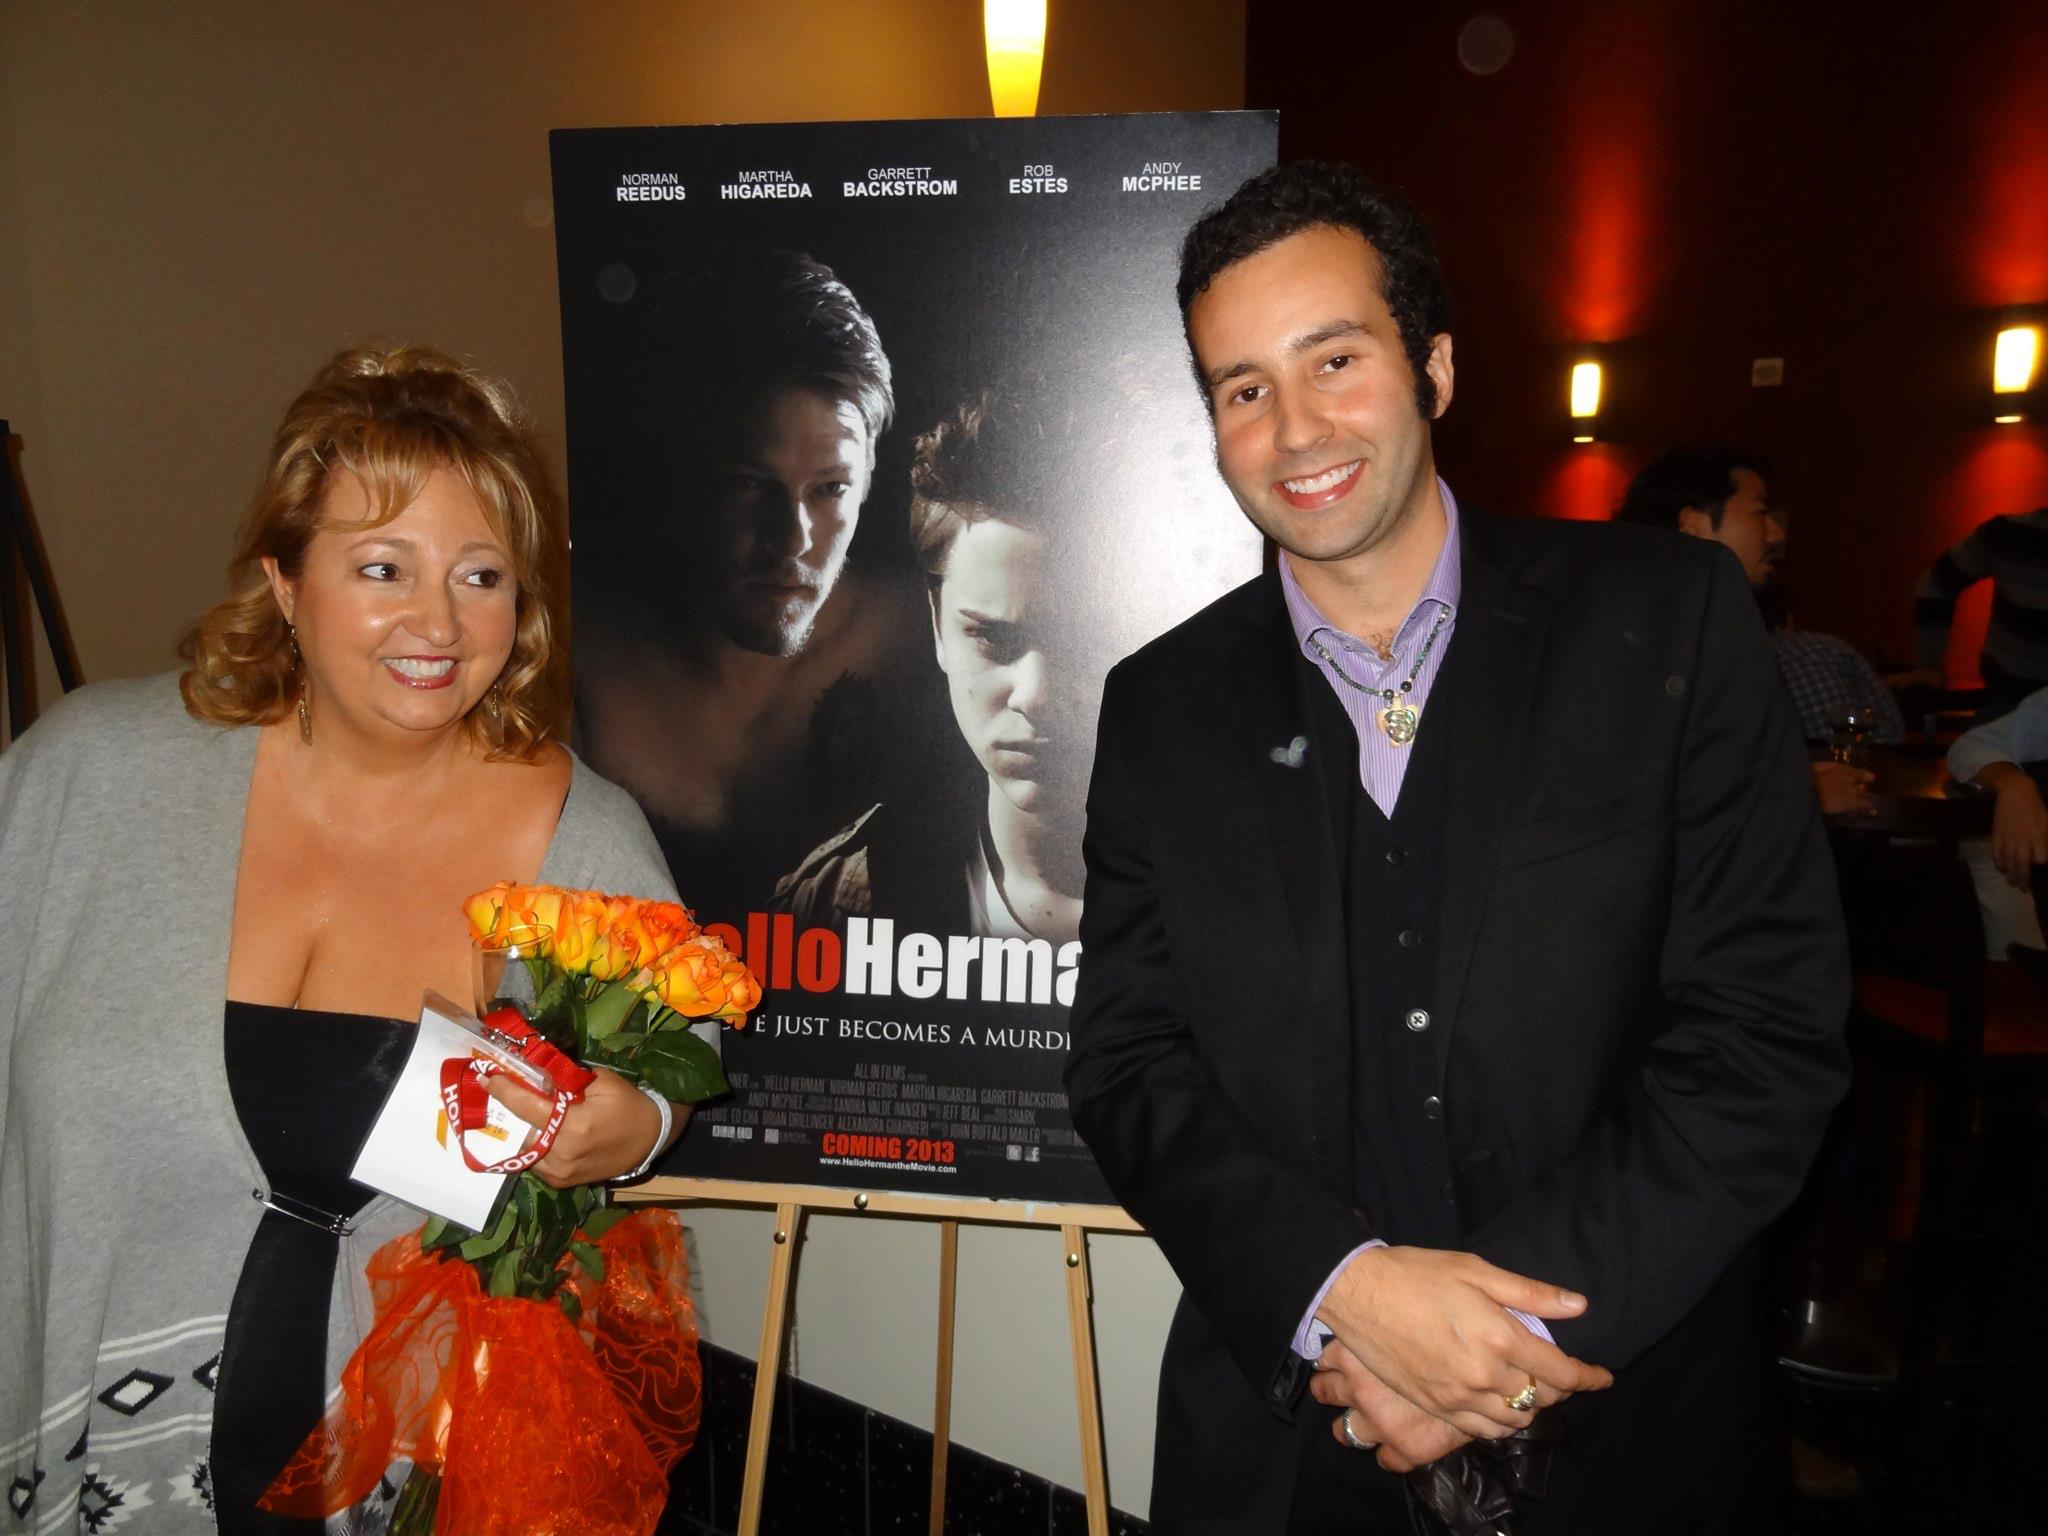 Director Michelle Danner and actor Paul Tirado at the screening of Hello Herman for the Hollywood Film Festival 2012 at the Arclight Hollywood.